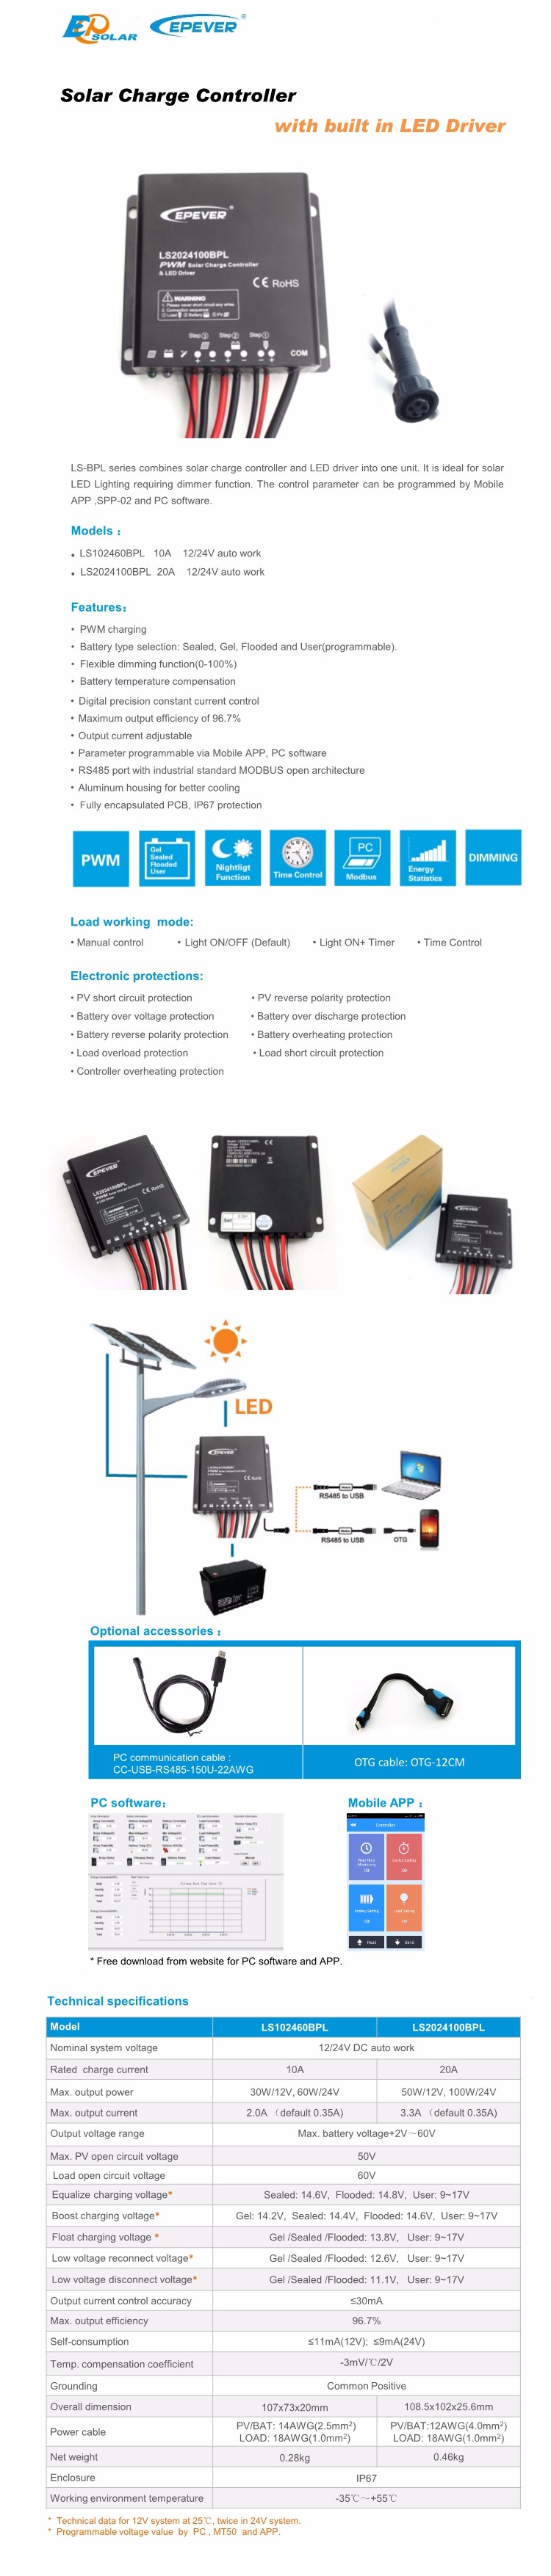 EPEVER-10A-12V-24V-PWM-Solar-Charge-Controller-Timer-IP67-Waterproof-Led-Driver-Solar-ChargeDischarg-1427503-6